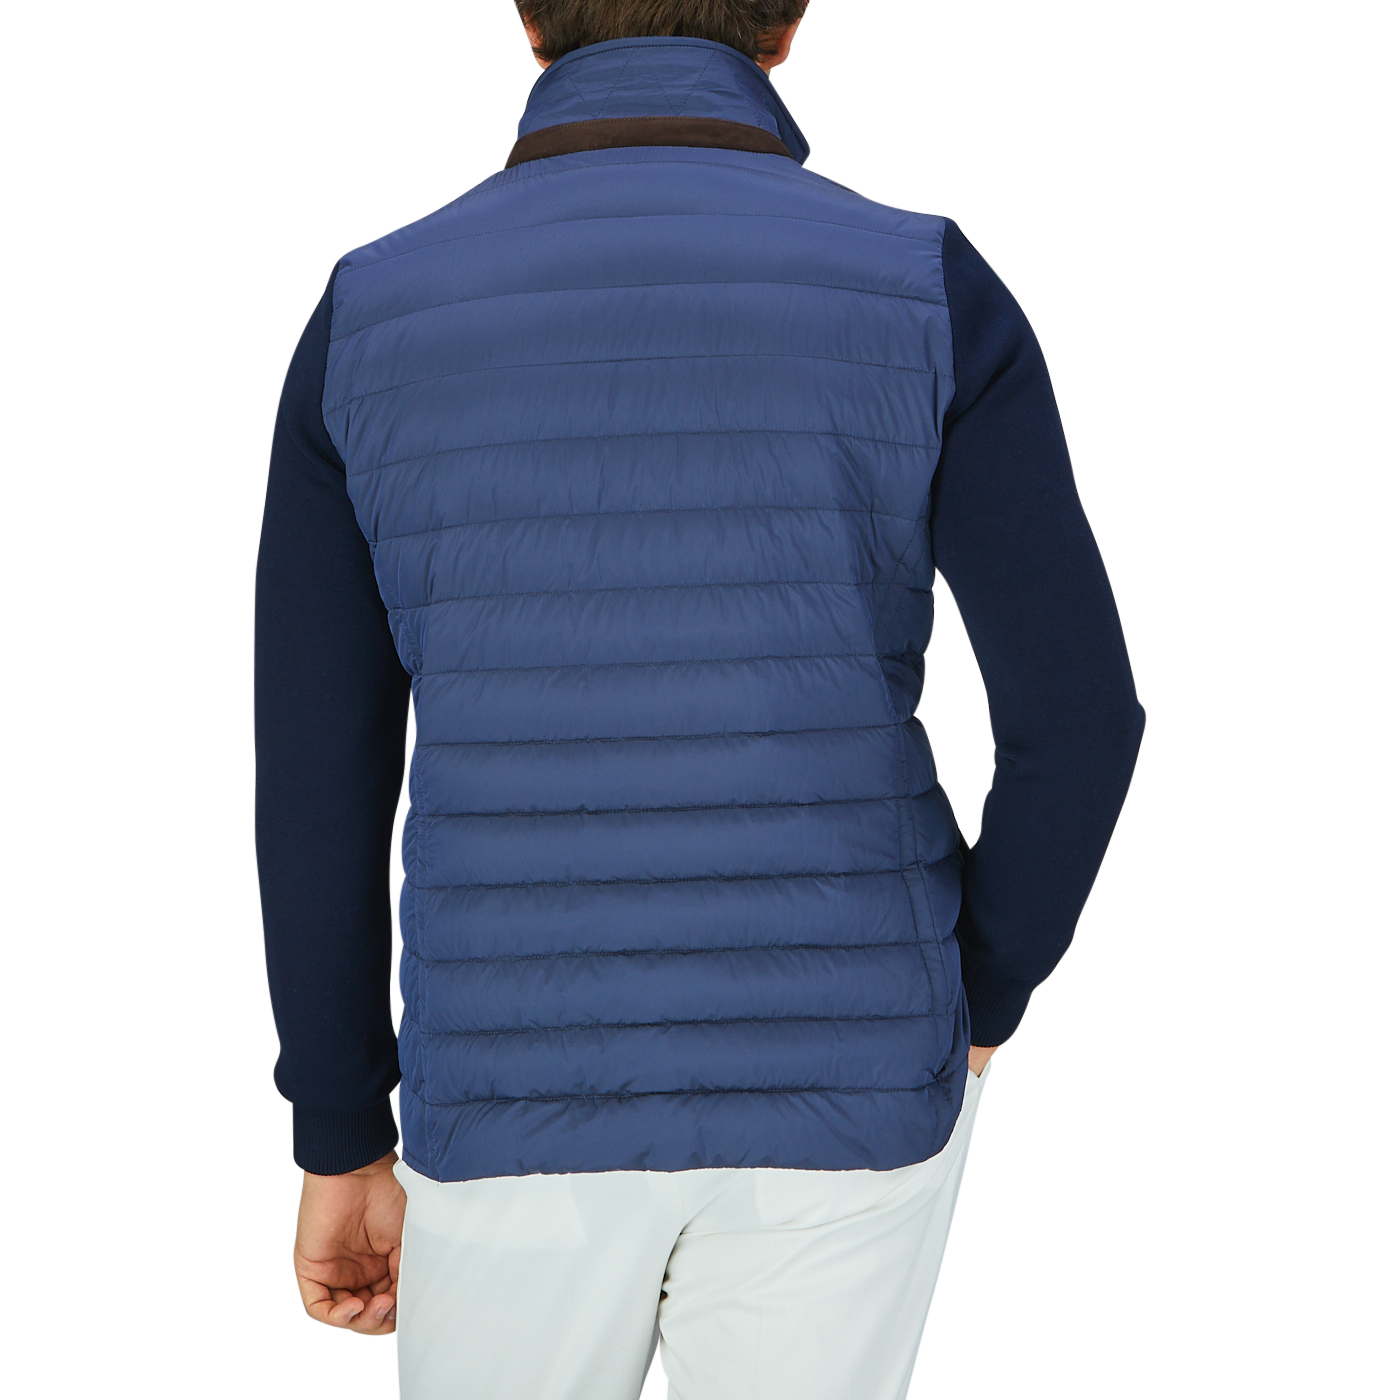 The back view of a man wearing a Moorer Ocean Blue Nylon Knitted Sleeve Jacket.